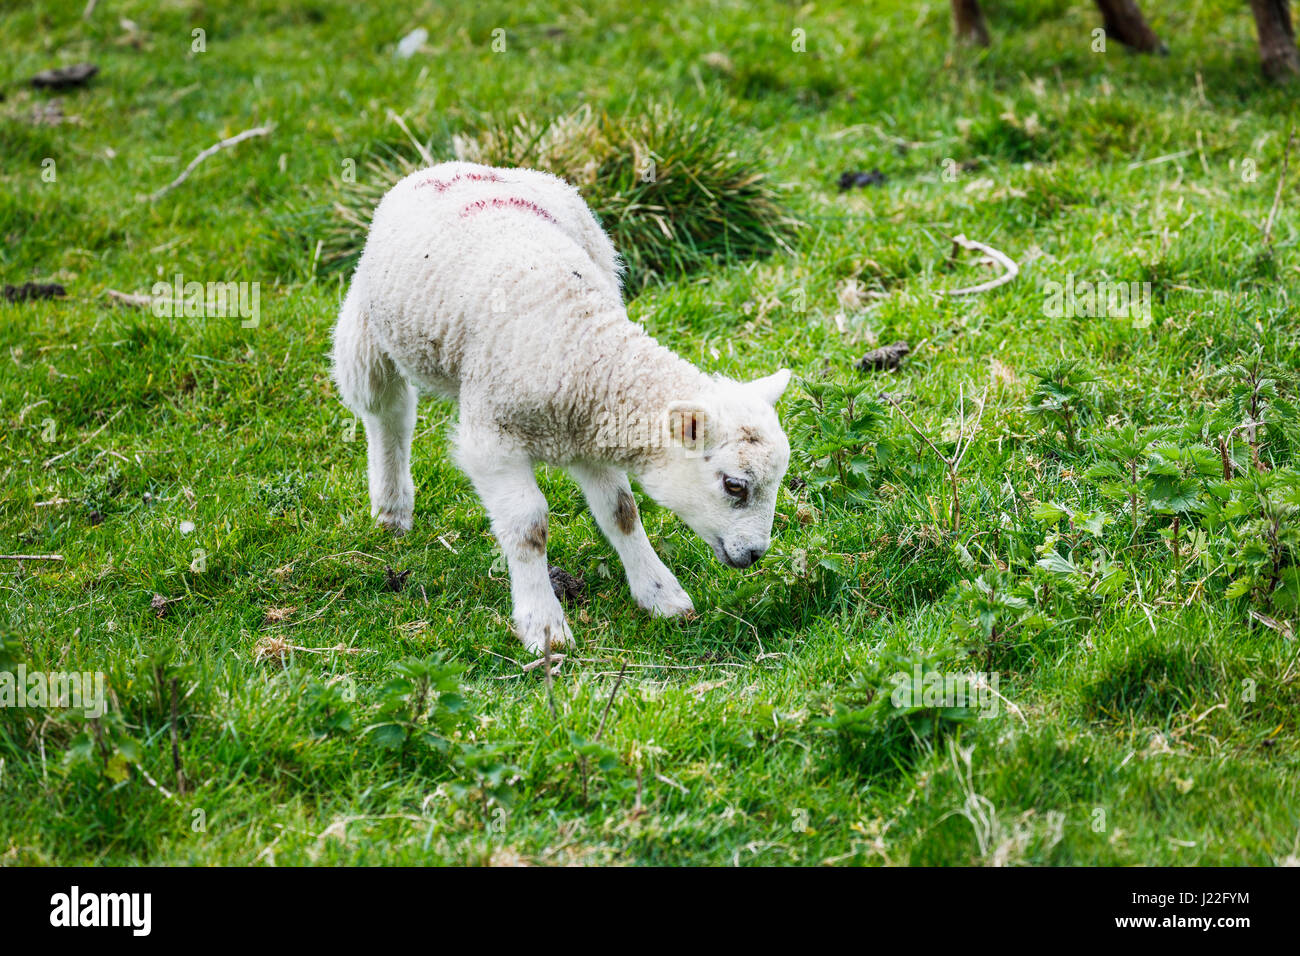 Livestock farming industry in the UK, lambing season: cute white spring lamb standing in a field in rural Gloucestershire, south-west England Stock Photo